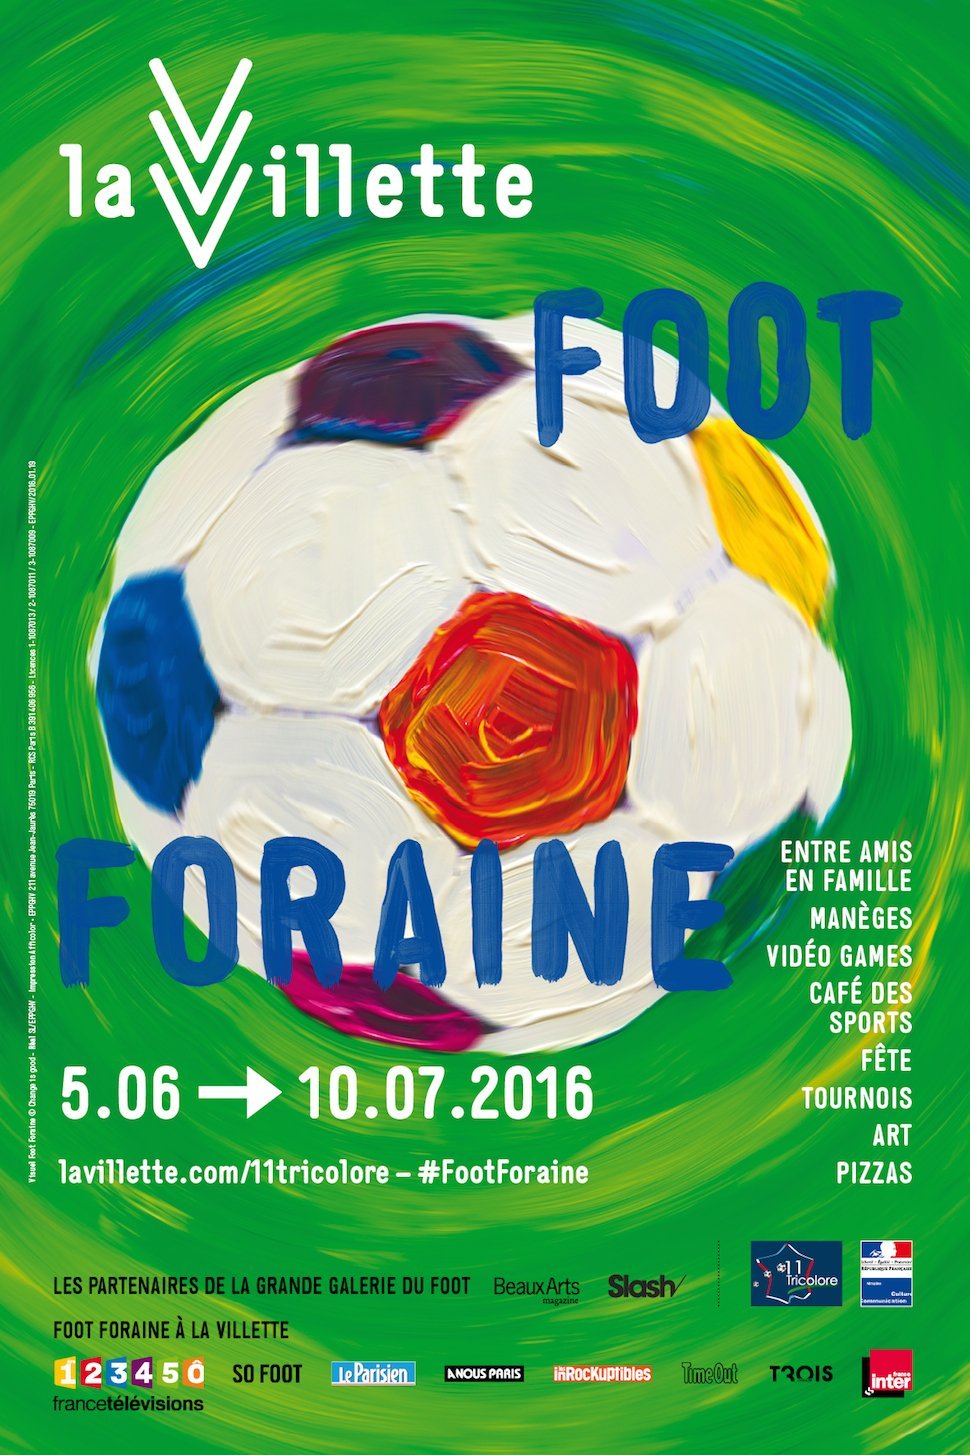 Foot Foraine